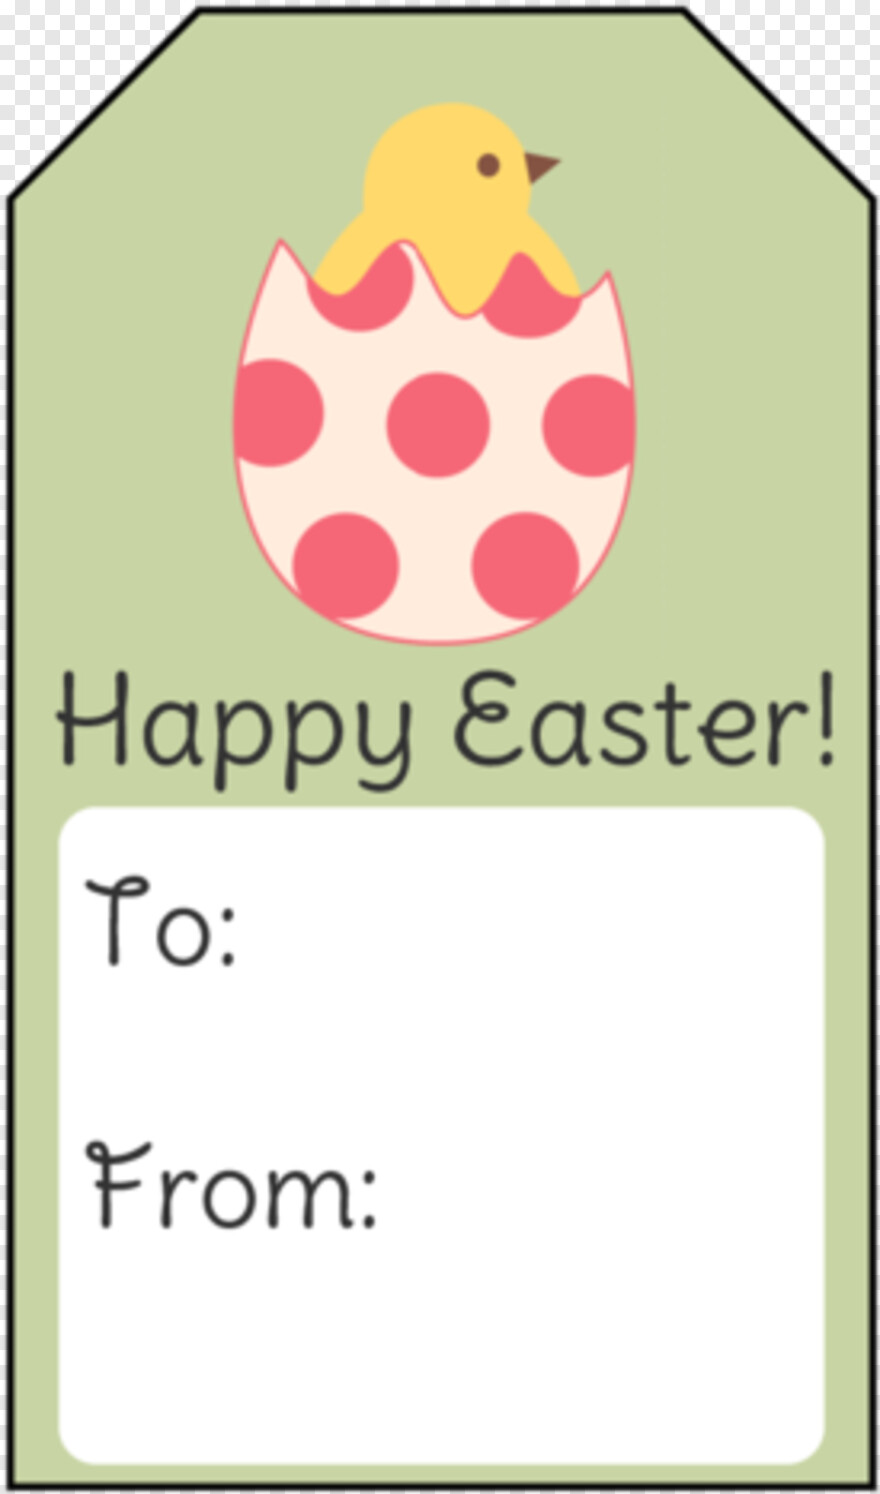 happy-easter-banner # 378161